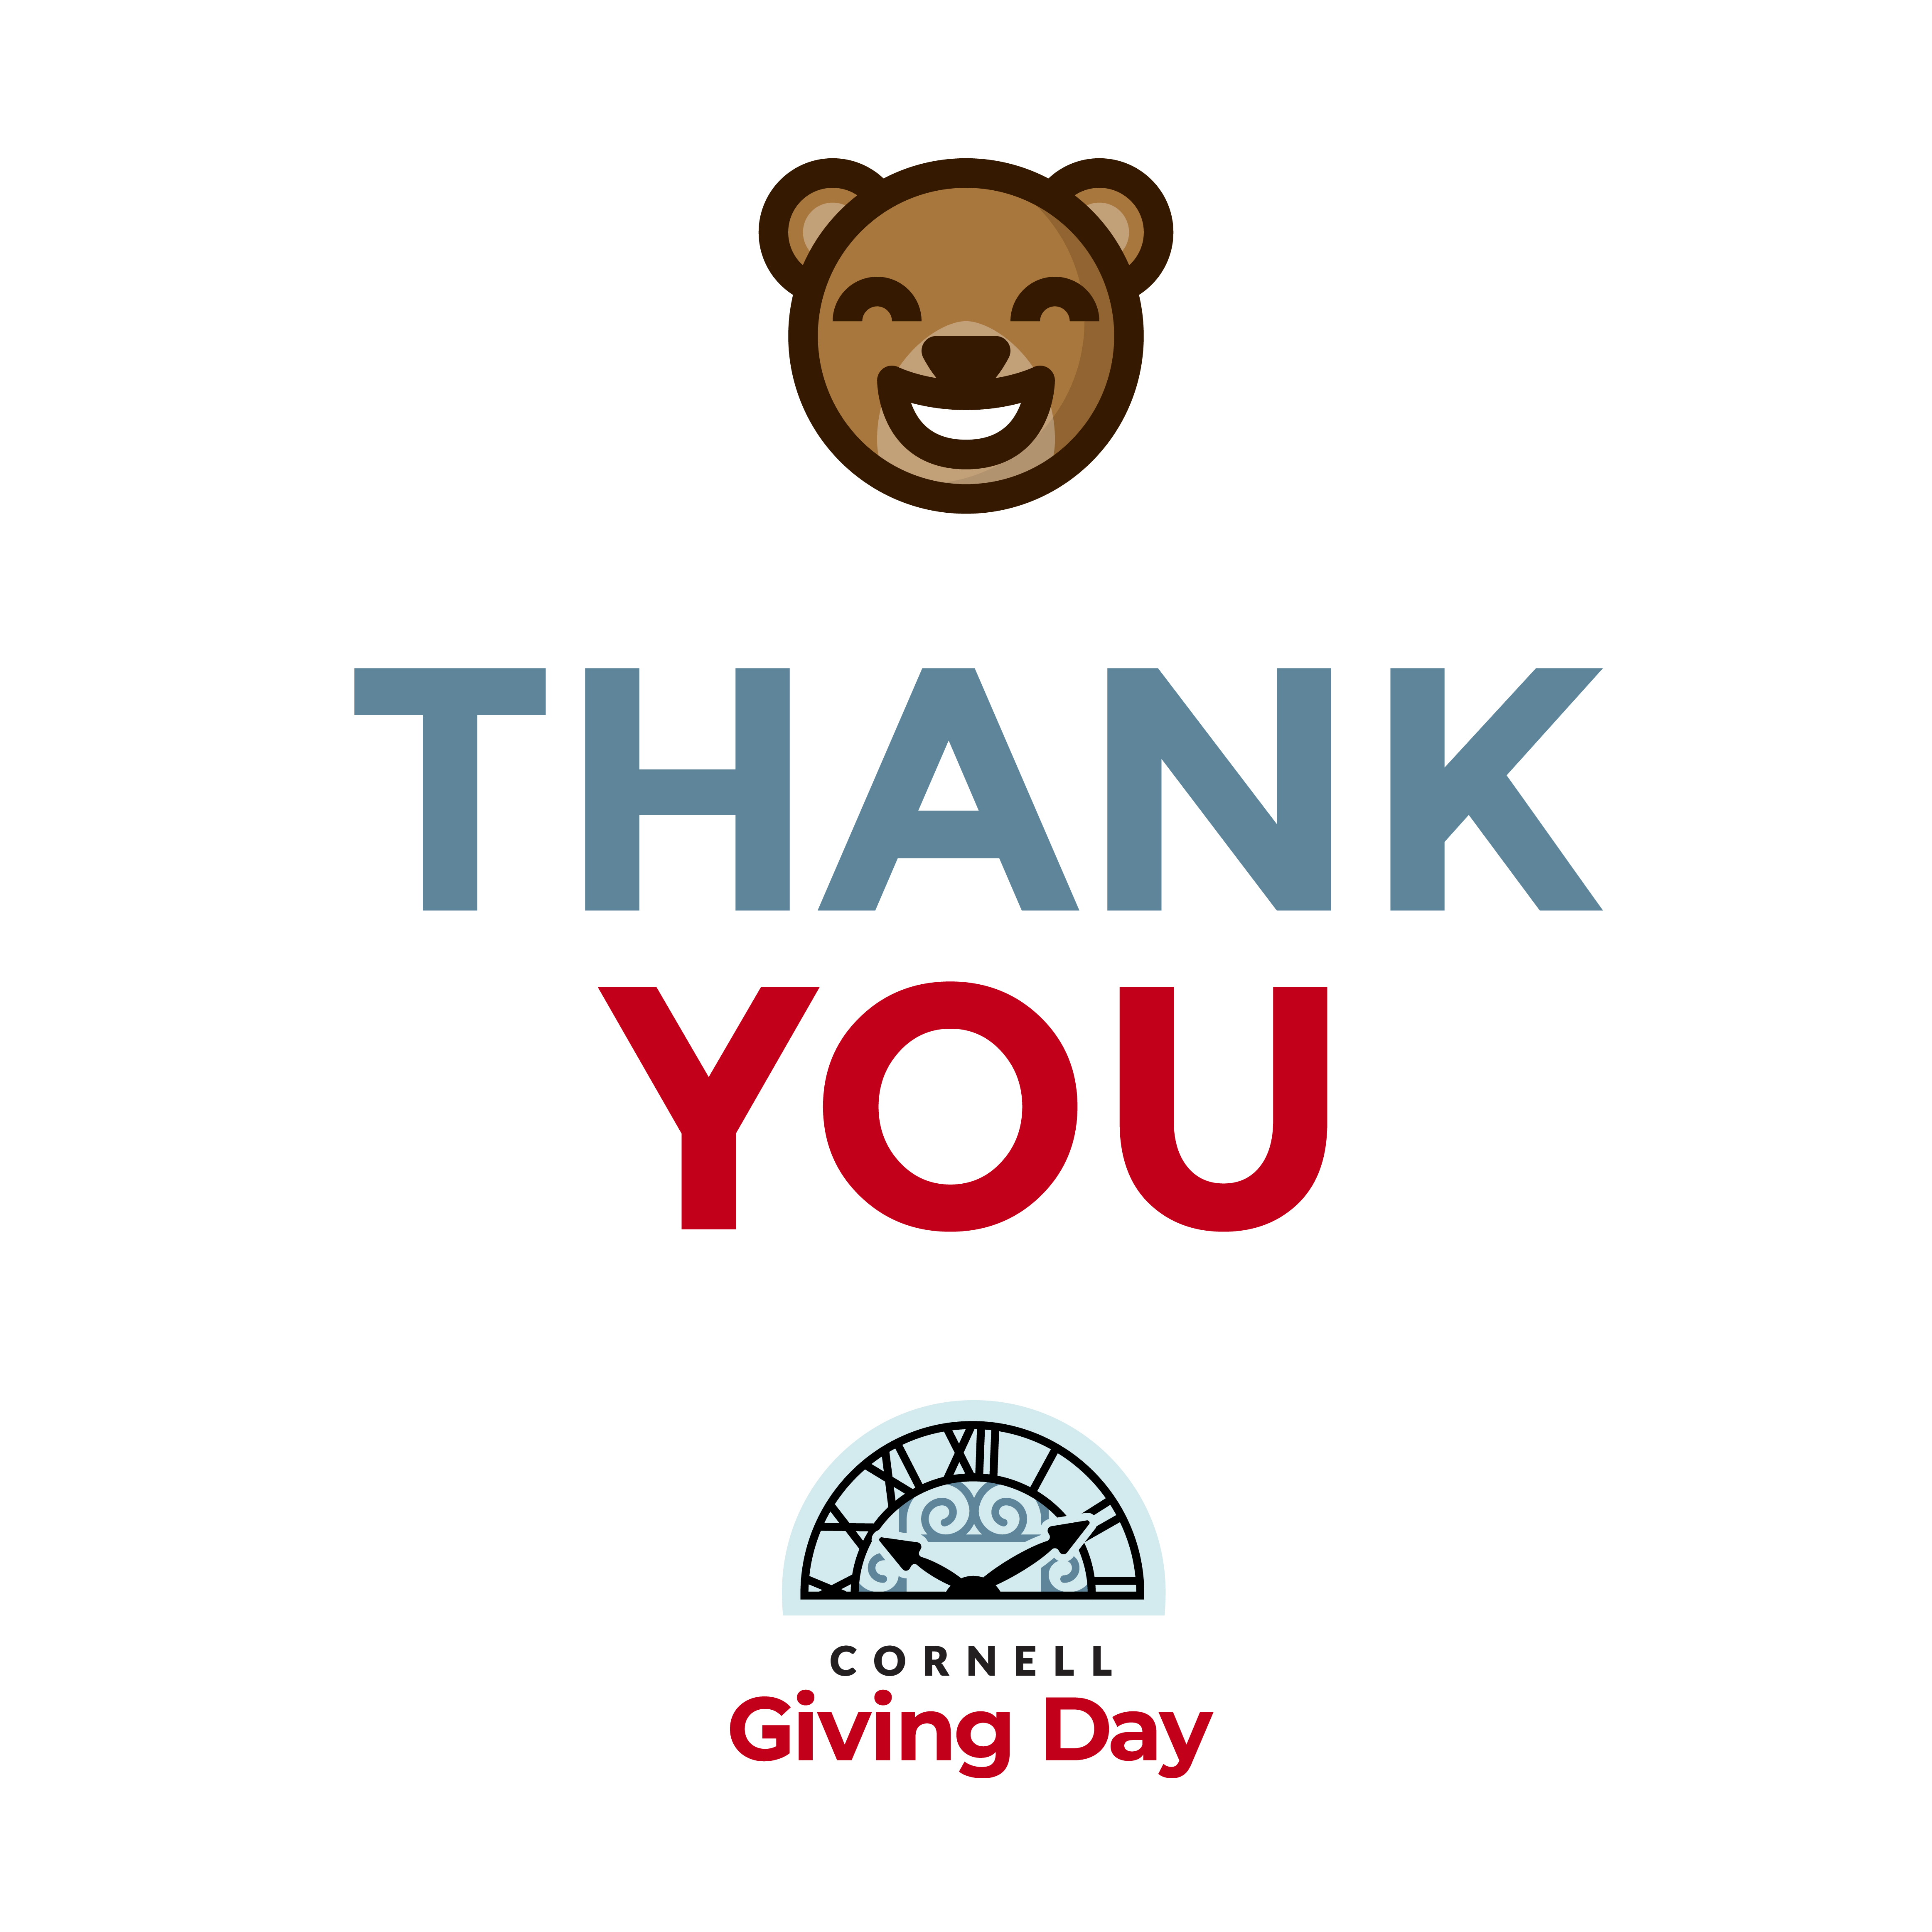 Thank You Image -- THANK YOU written in blue and red with cartoon of a bear over the Cornell Giving Day logo